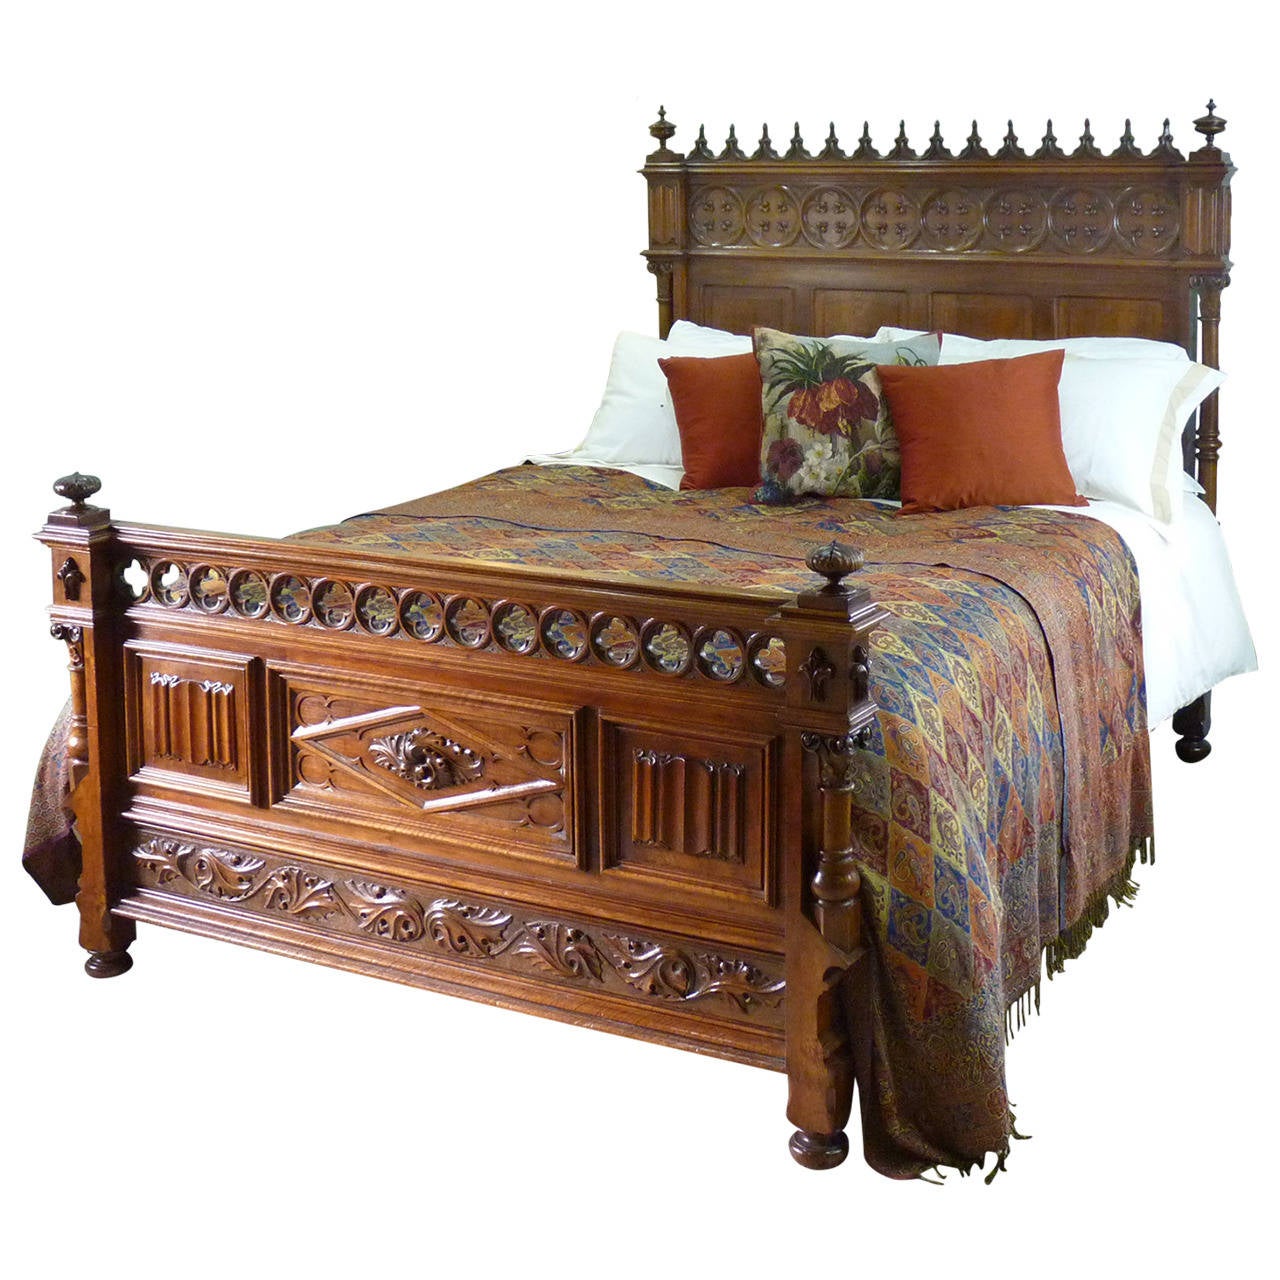 Rare Gothic Style Bed In Walnut At 1stdibs, Gothic Bed Frame King